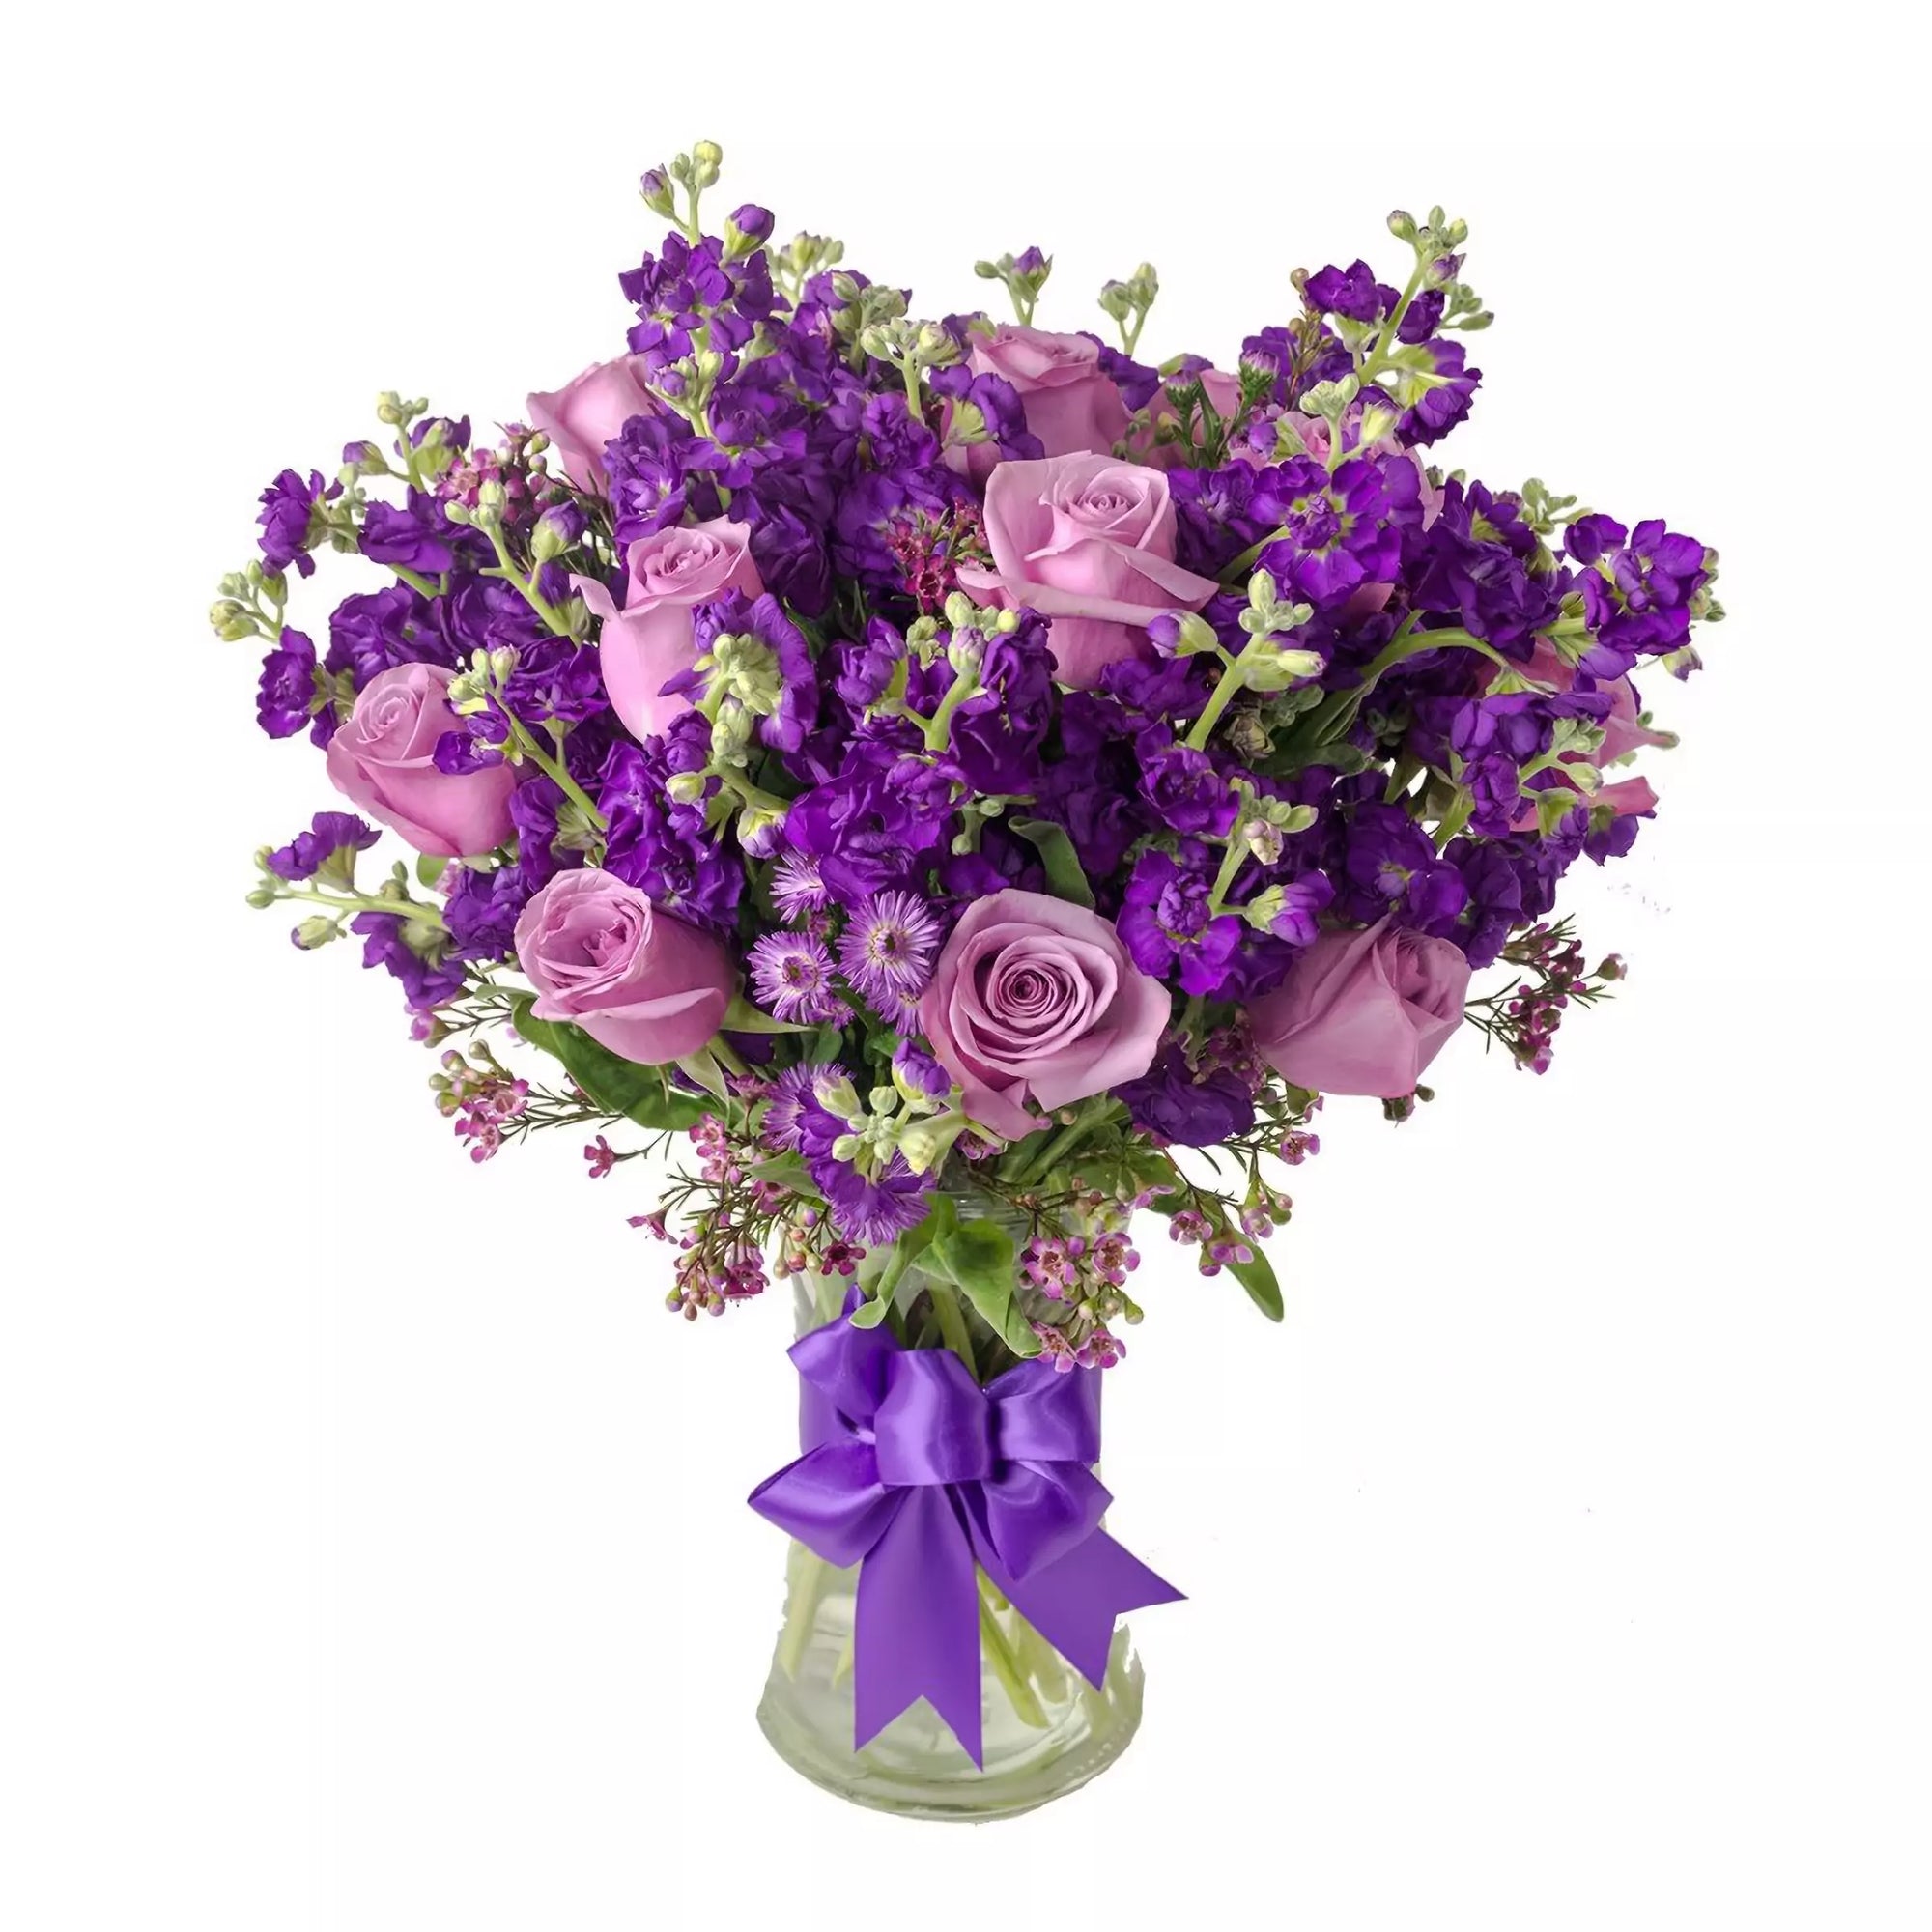 A gorgeous arrangement of purple and lavender roses, stock and waxflower, accented with fresh greens.